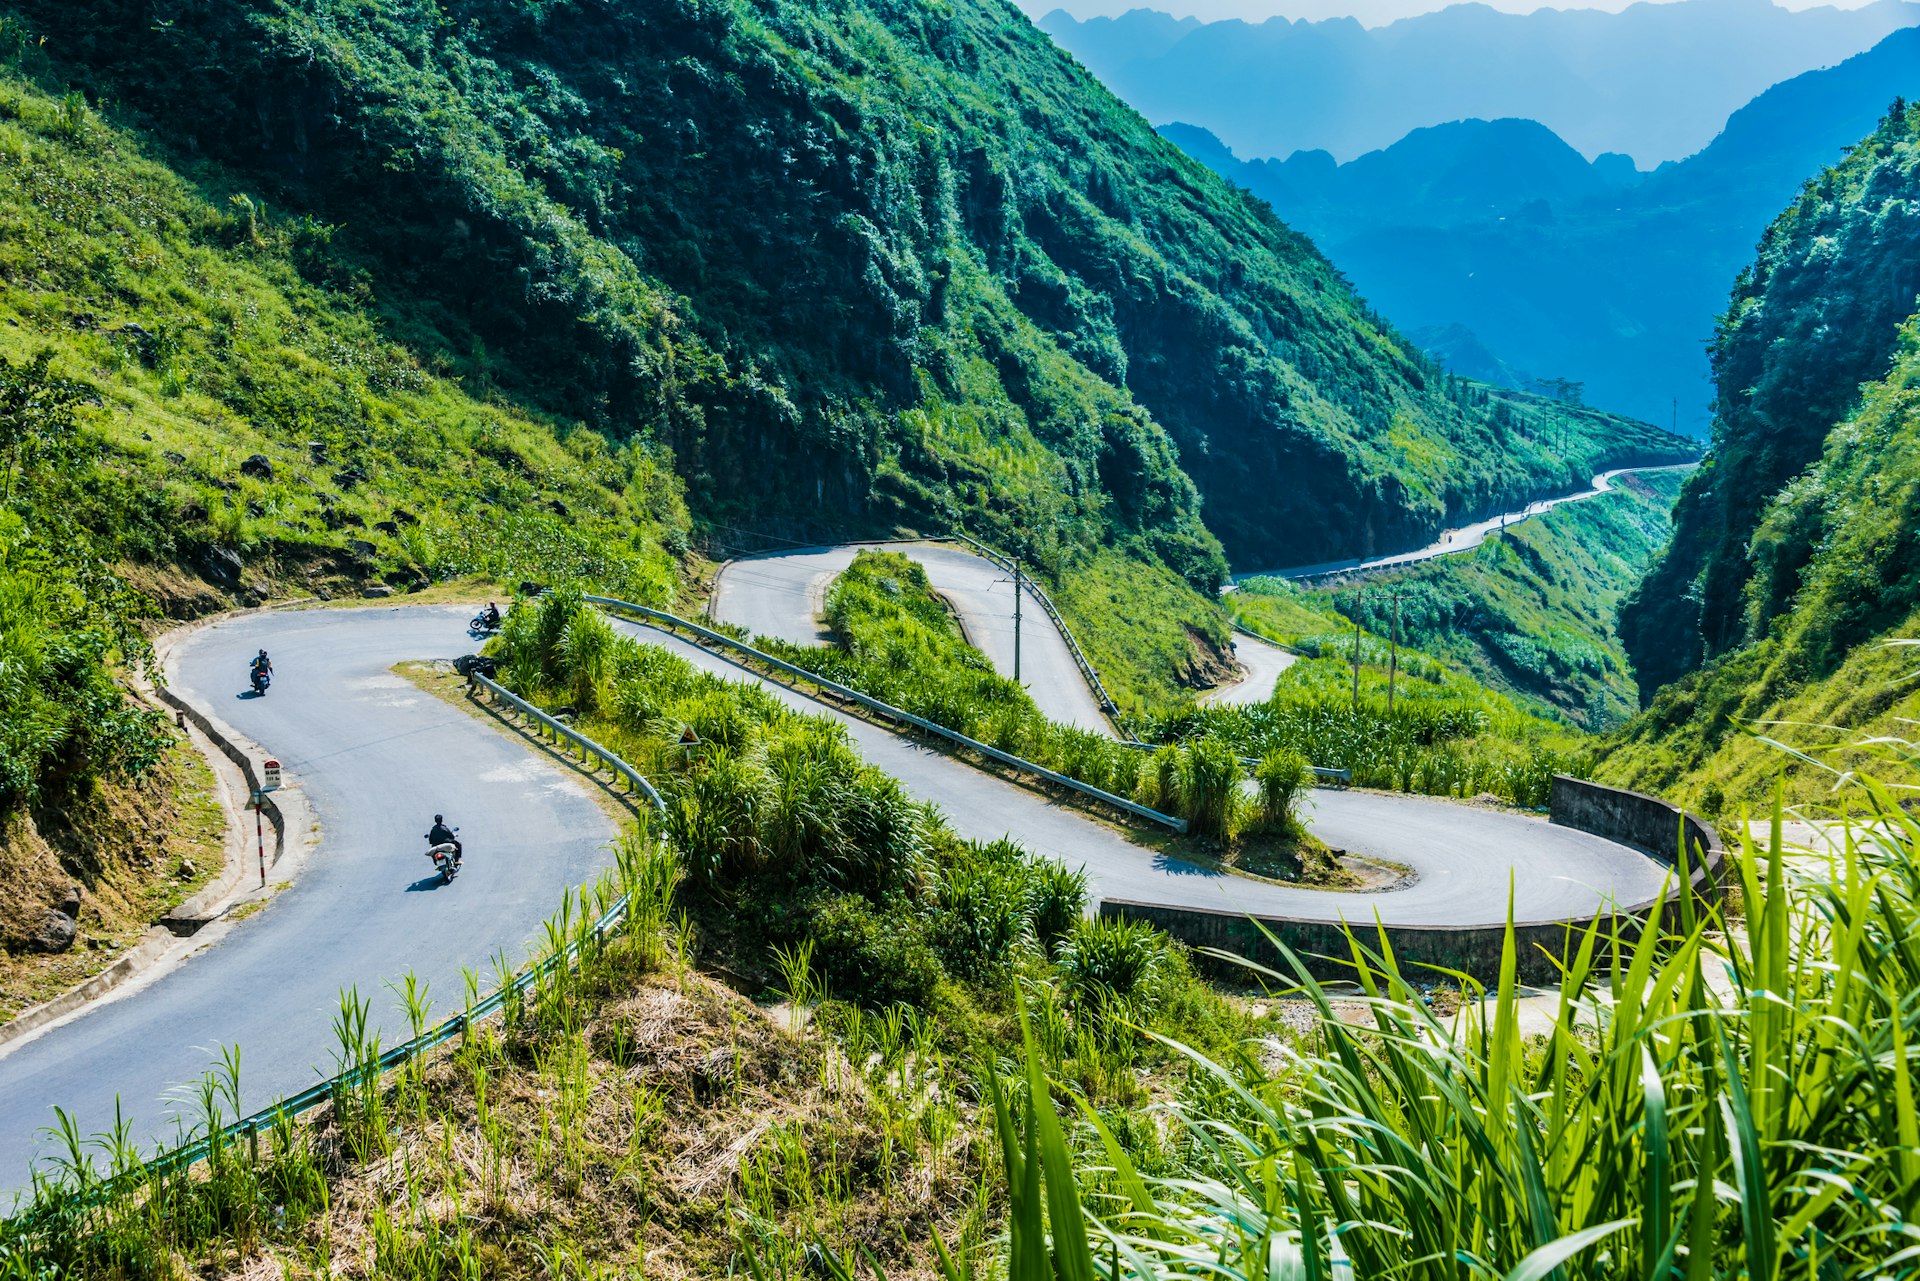 A winding switchback road in the lush green Ha Giang province in Vietnam